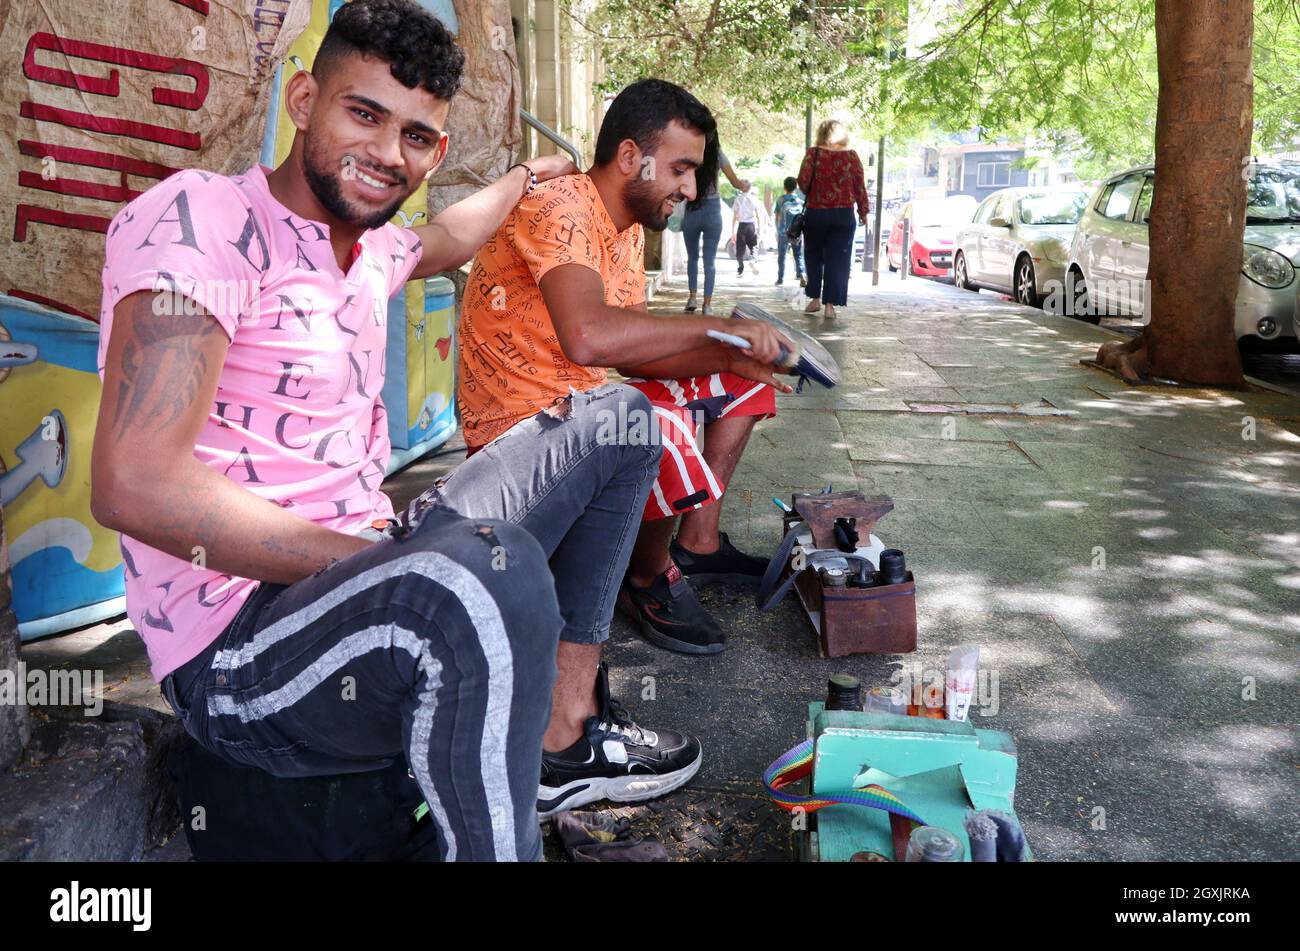 Syrian young men clean shoes in a street of Beirut, Lebanon, on September  29, 2021. According to UNHCR, life of refugees is worsening despite  increased assistance. The preliminary findings of the 2021